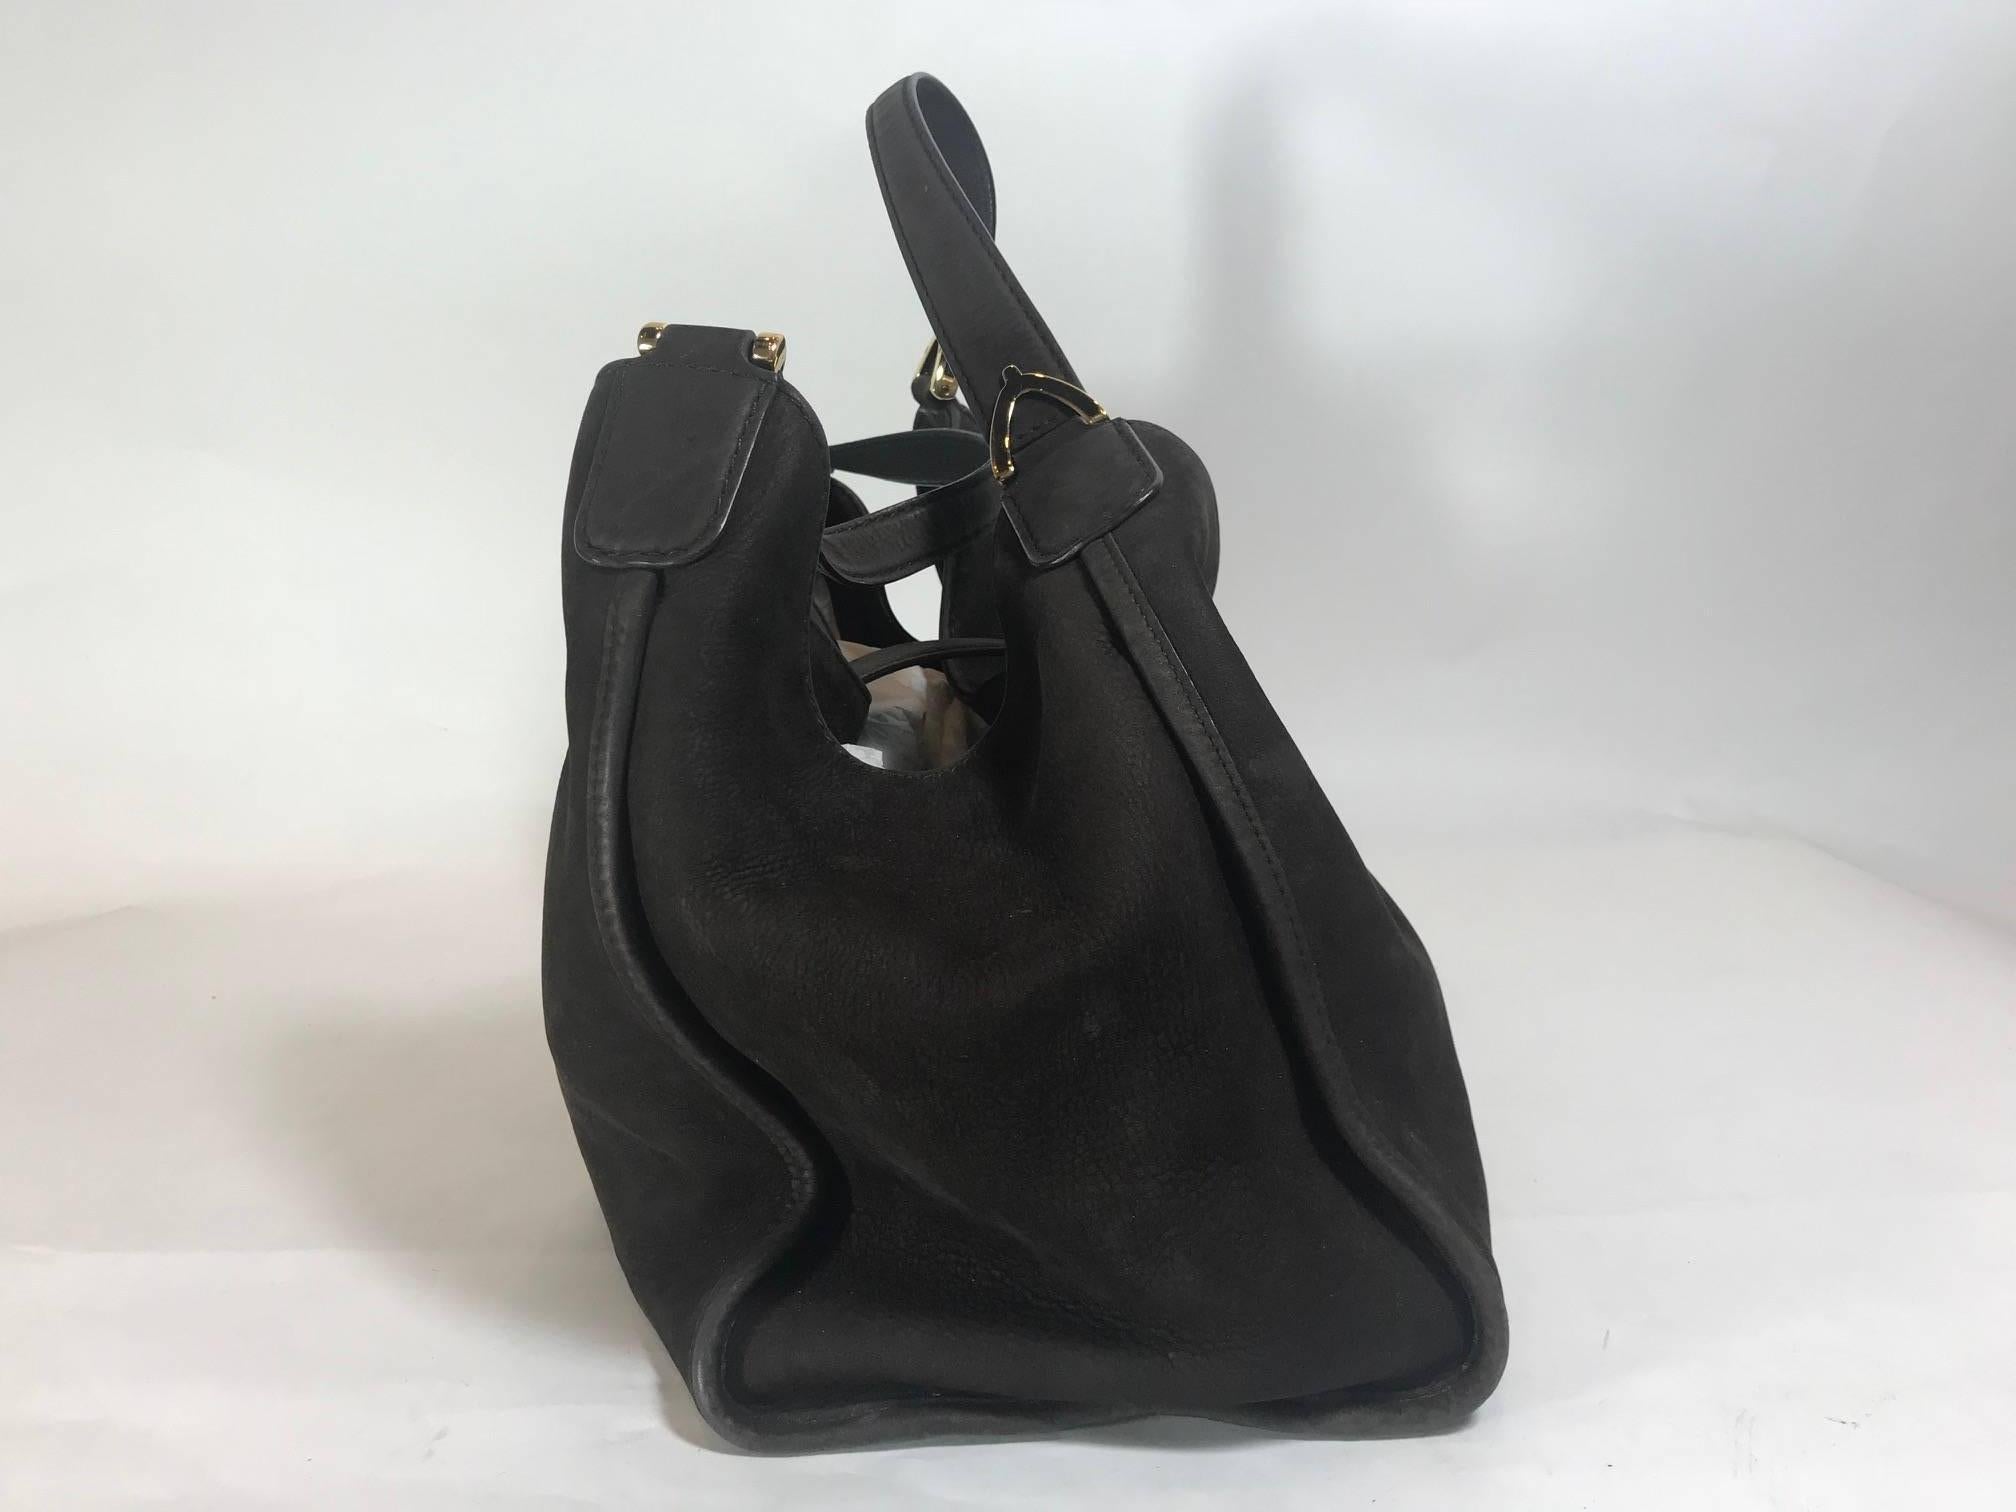 Gucci Soft Stirrup Hobo In Excellent Condition For Sale In Roslyn, NY